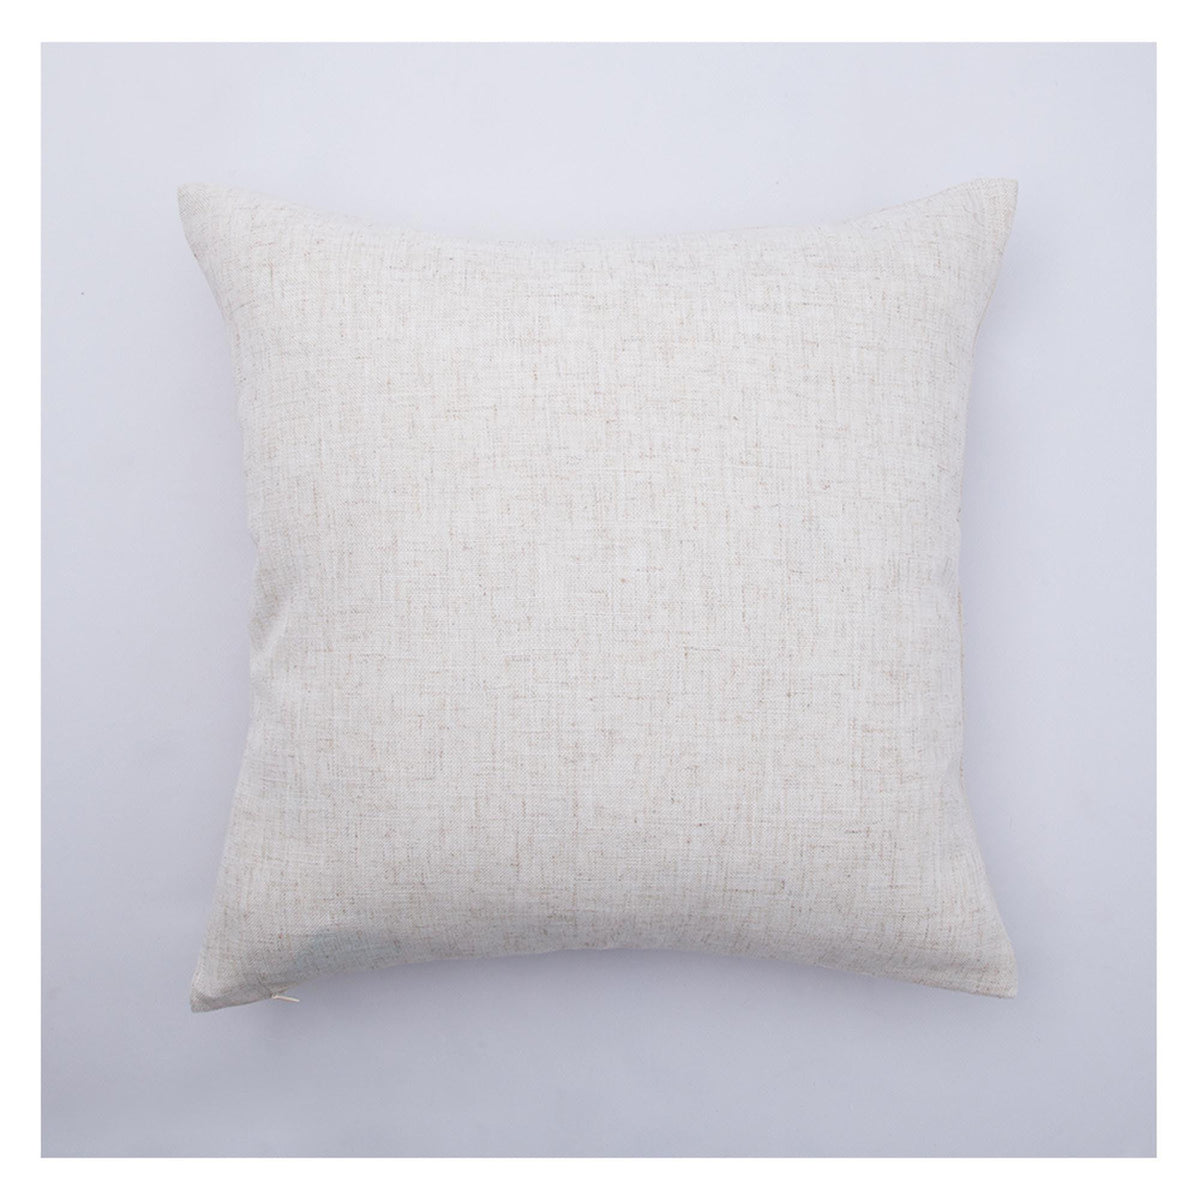 Montreal Lighting & Hardware - Winsor Pillow by Renwil - Montreal Lighting & Hardware